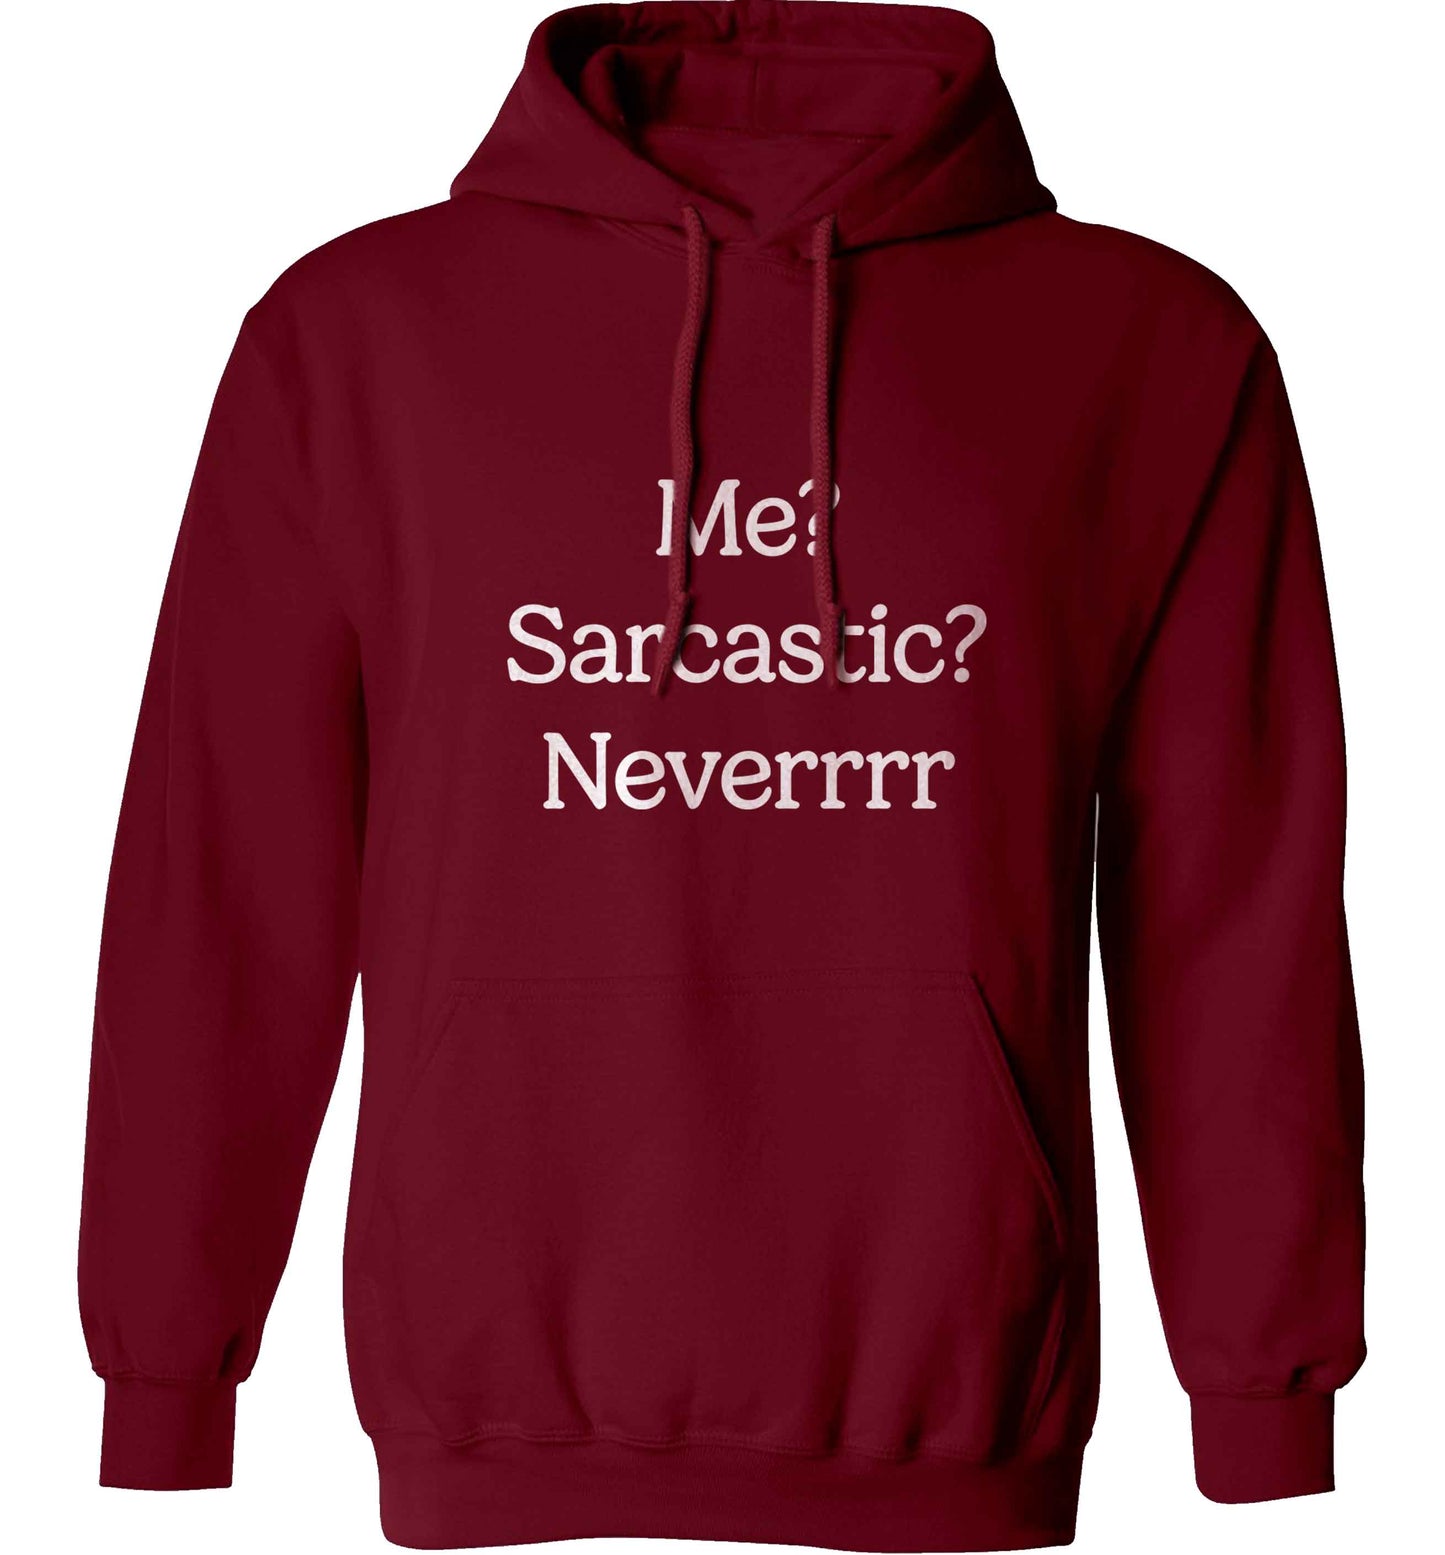 Me? sarcastic? never adults unisex maroon hoodie 2XL